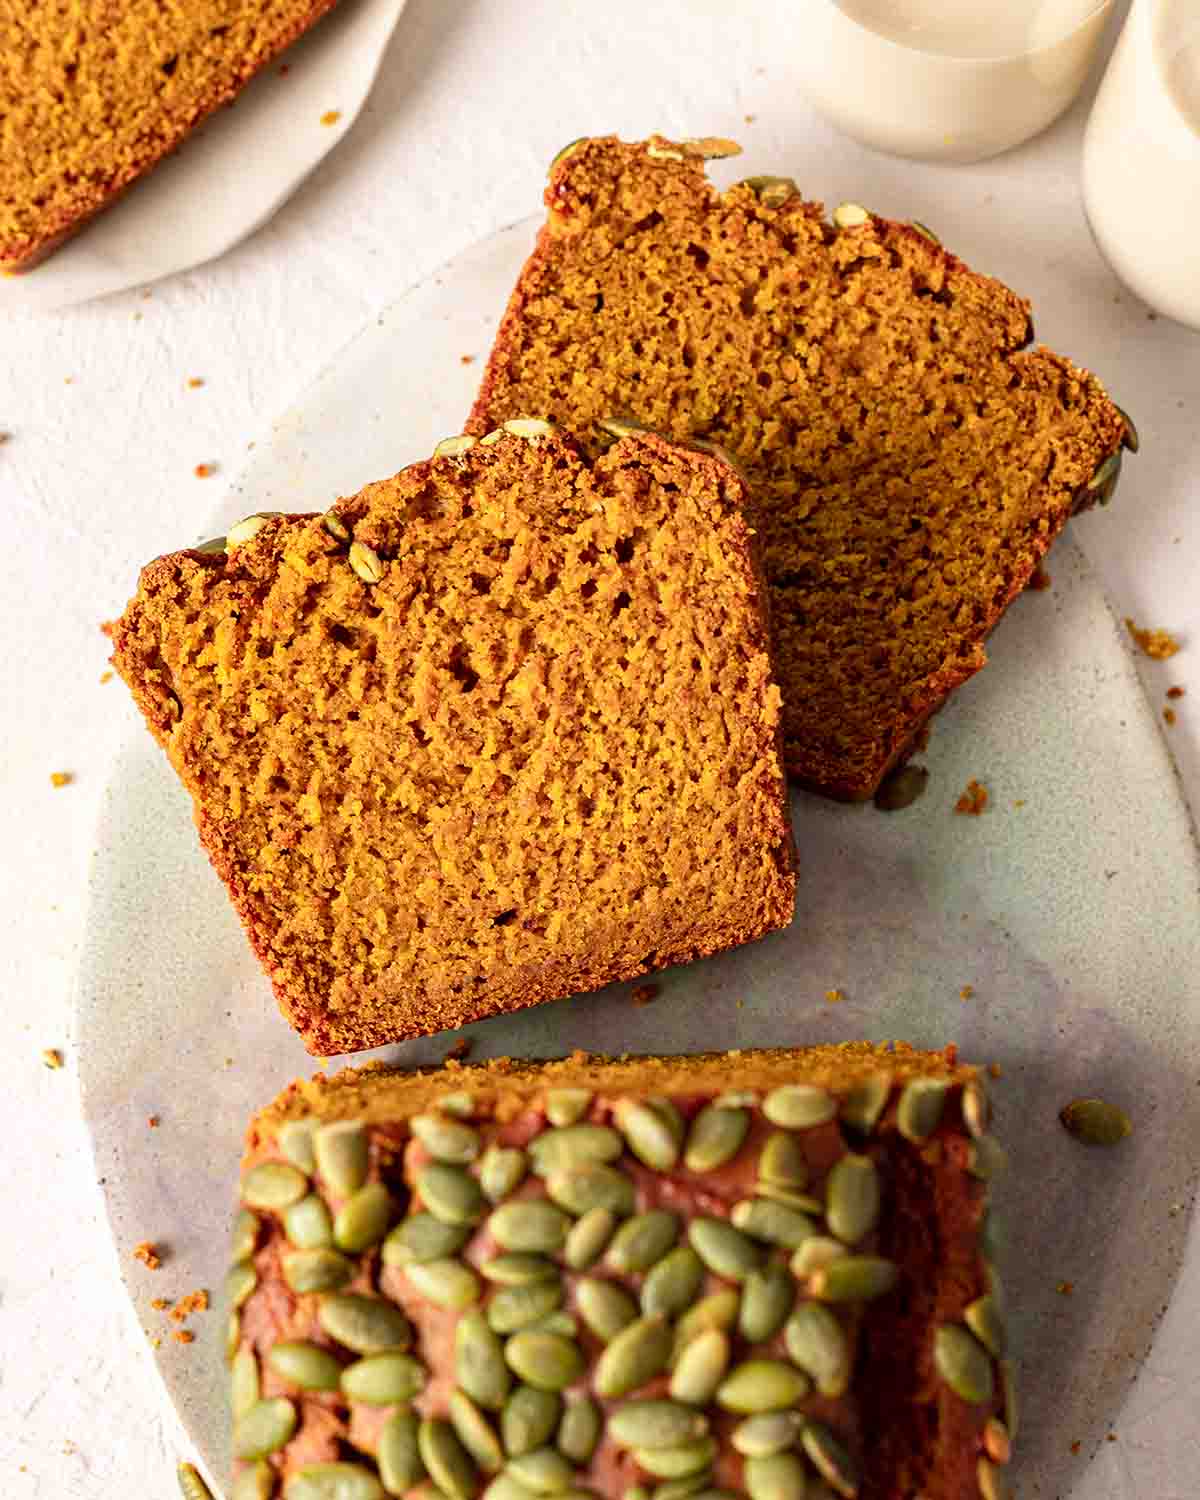 Vegan pumpkin bread on platter with two slices cut out showing fluffy golden texture.